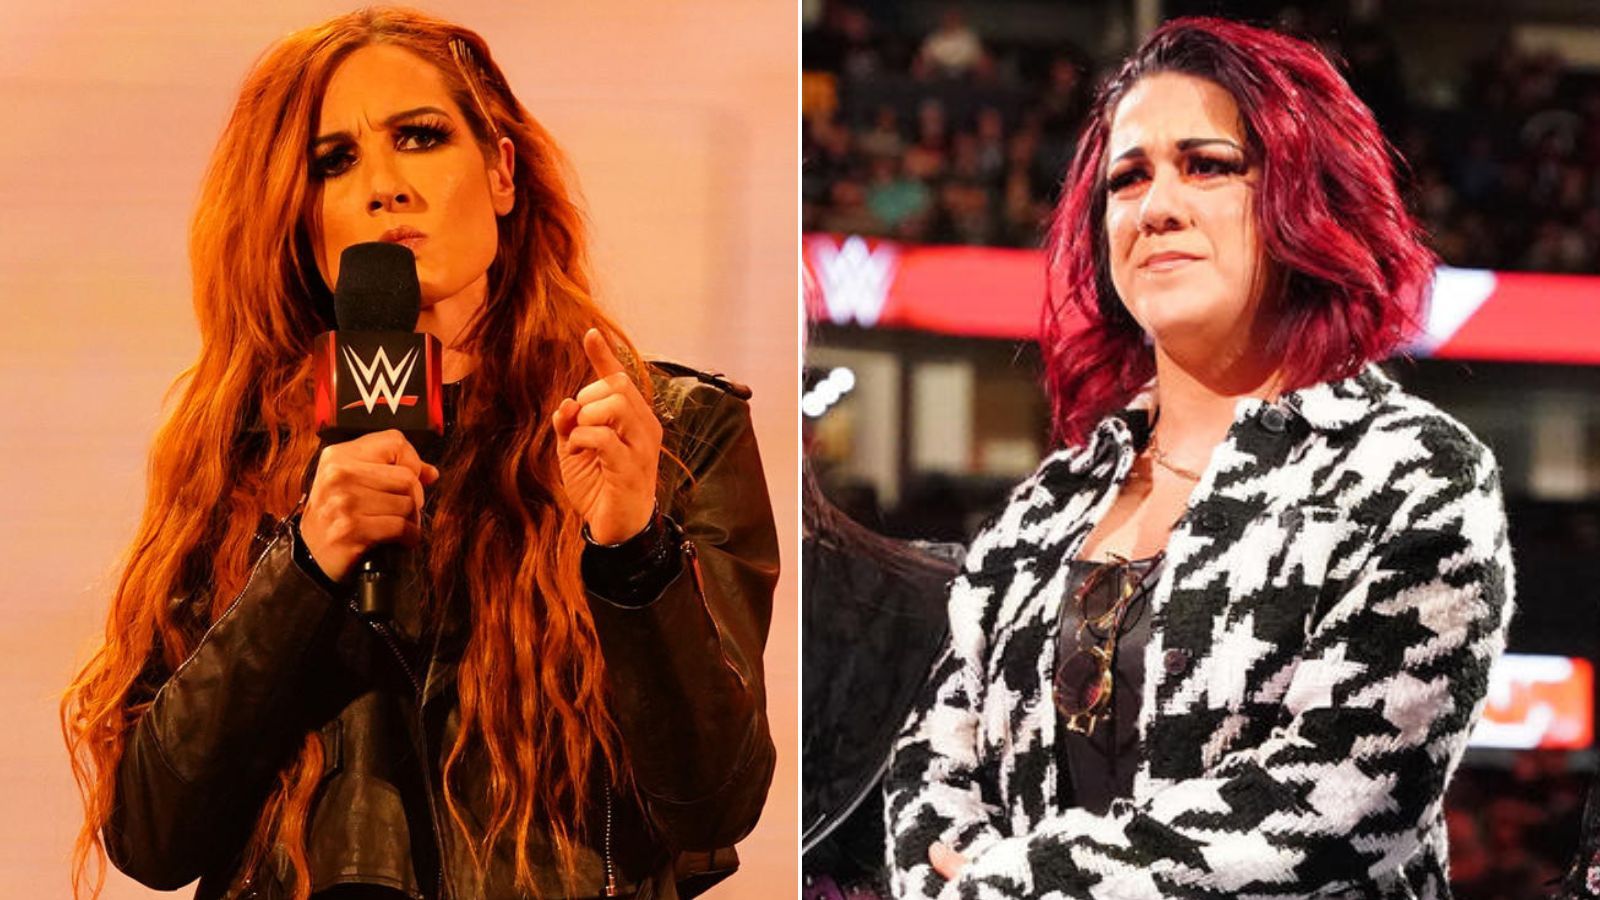 WWE's Becky Lynch & Bayley Will Also Join Ultimate Rivals